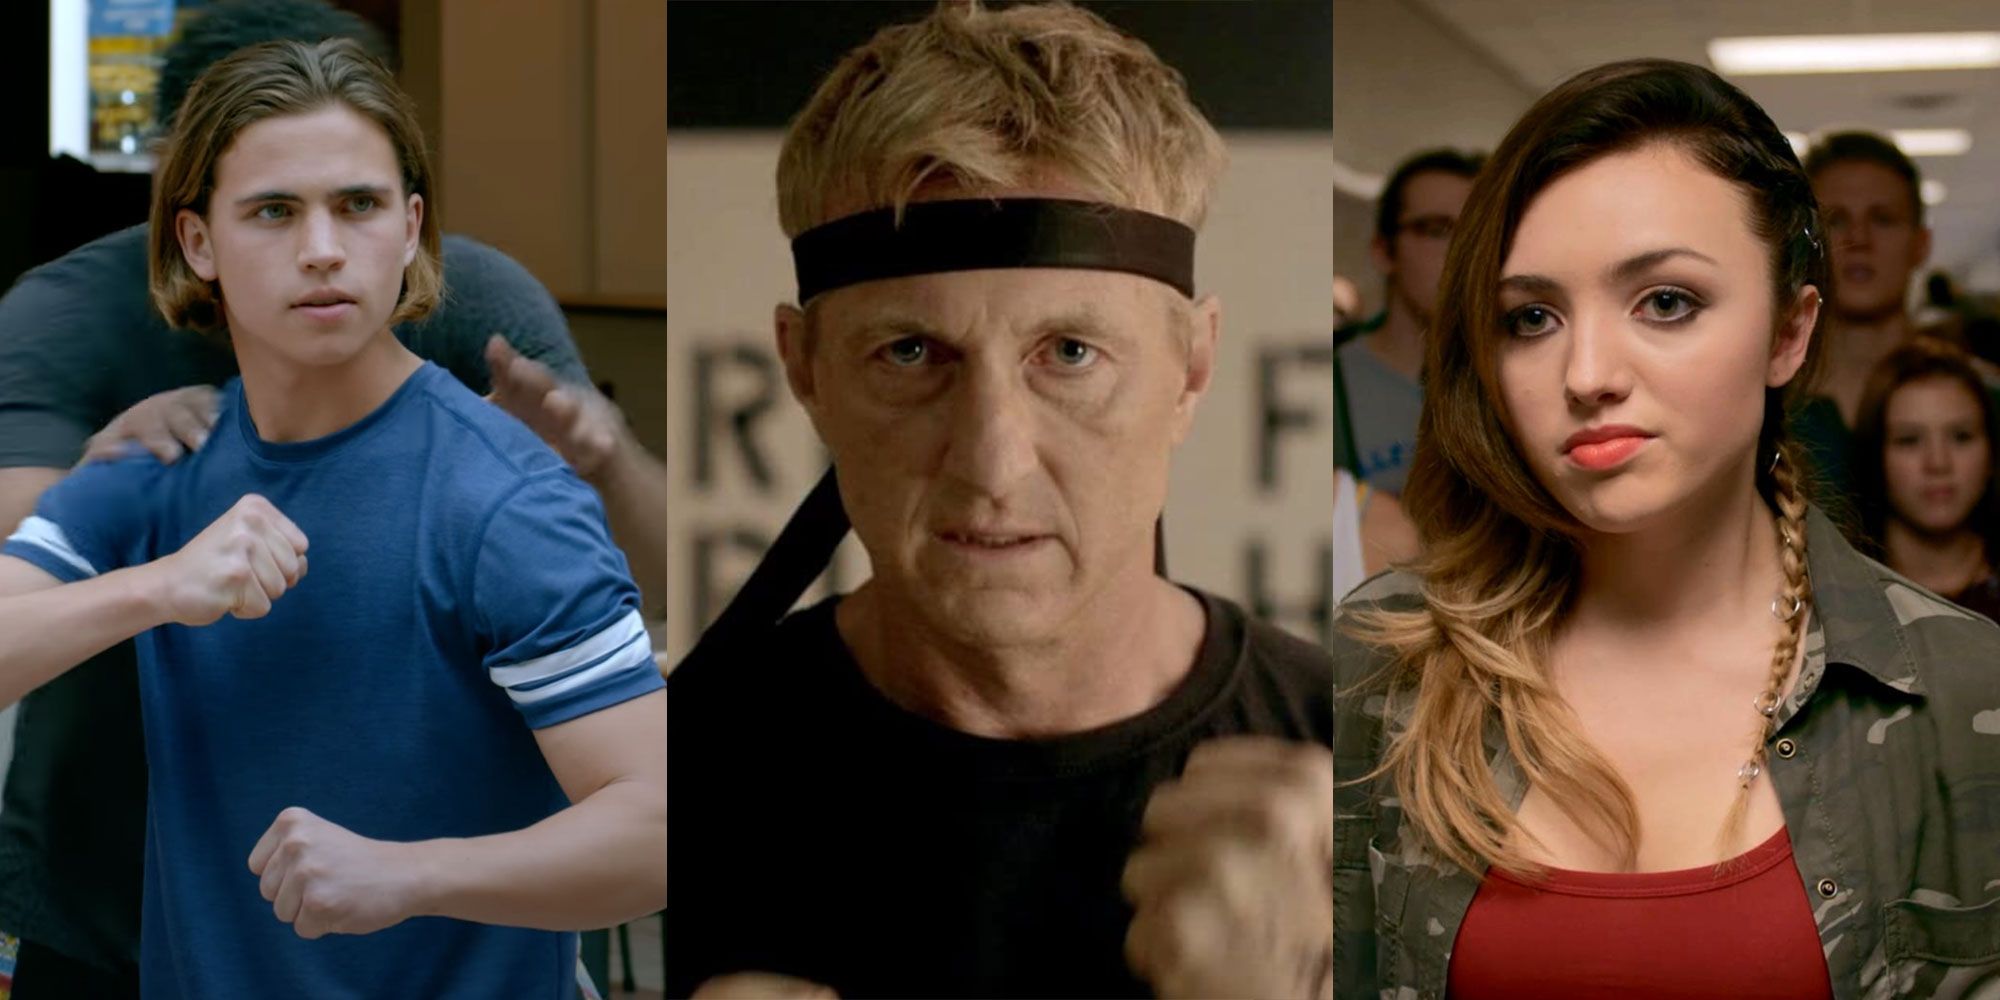 A split image features Robby, Johnny, and Tory from the Netflix Cobra Kai series